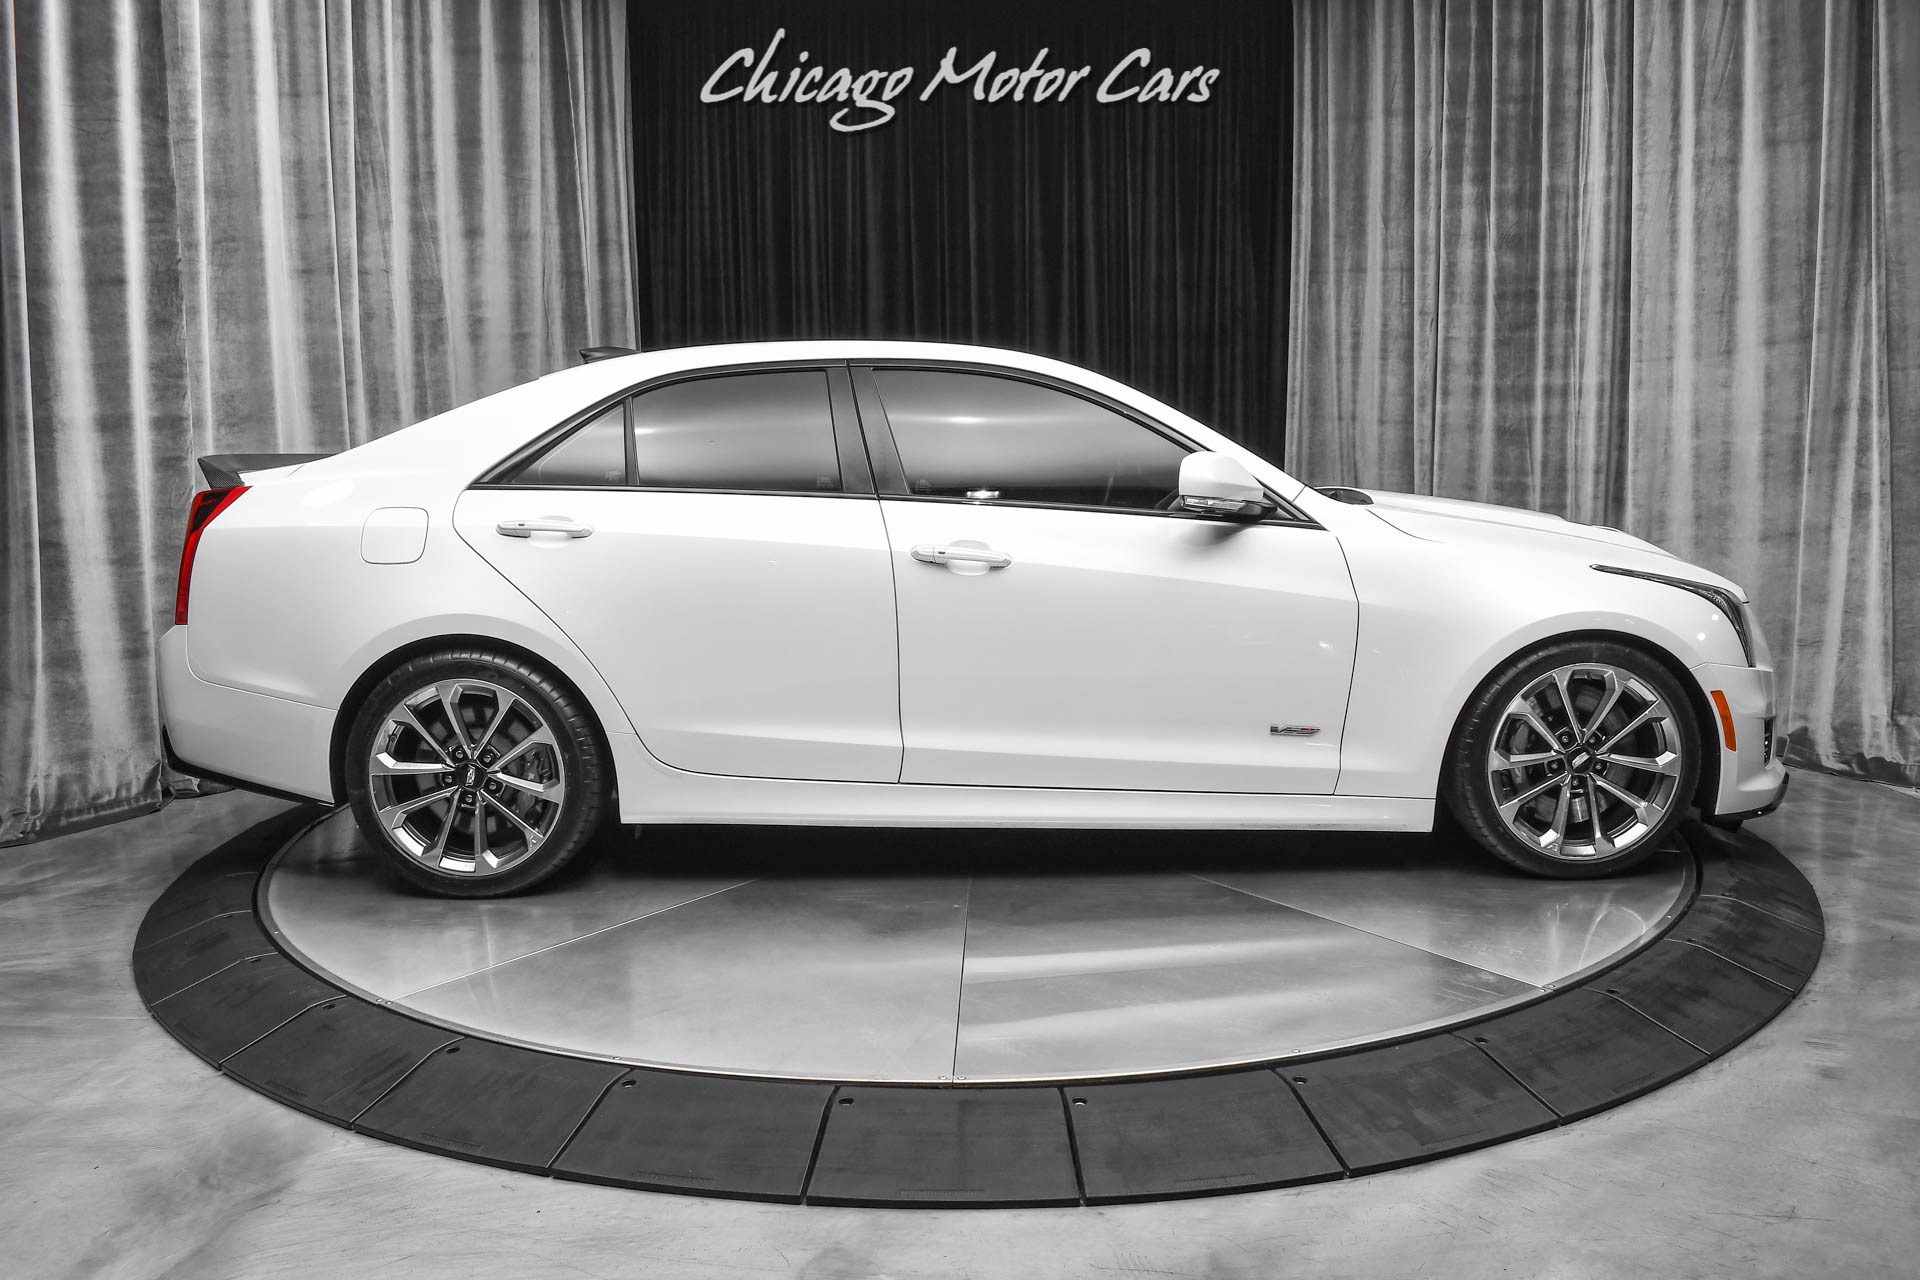 Used-2016-Cadillac-ATS-V-Sedan-RECARO-Performance-Seats-Luxury-Package-Tapout-Tuned